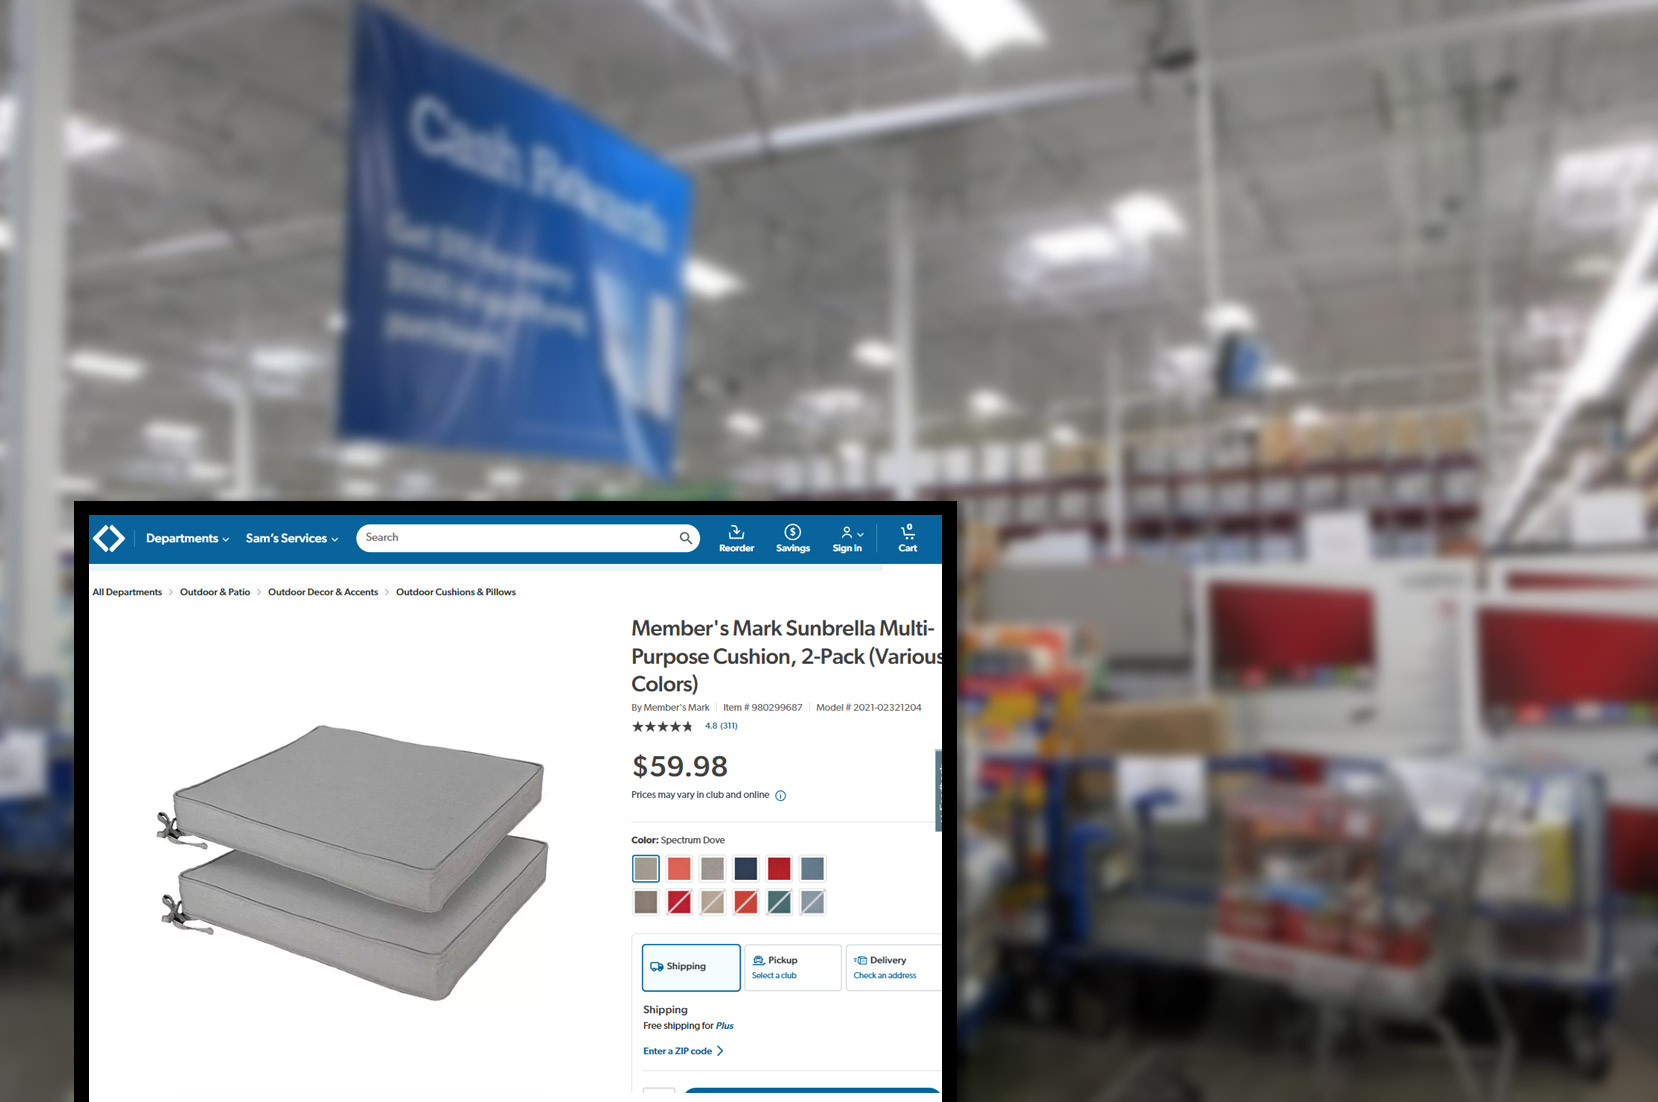 samsclub-comproduct-pricing-information-and-image-scraping-services